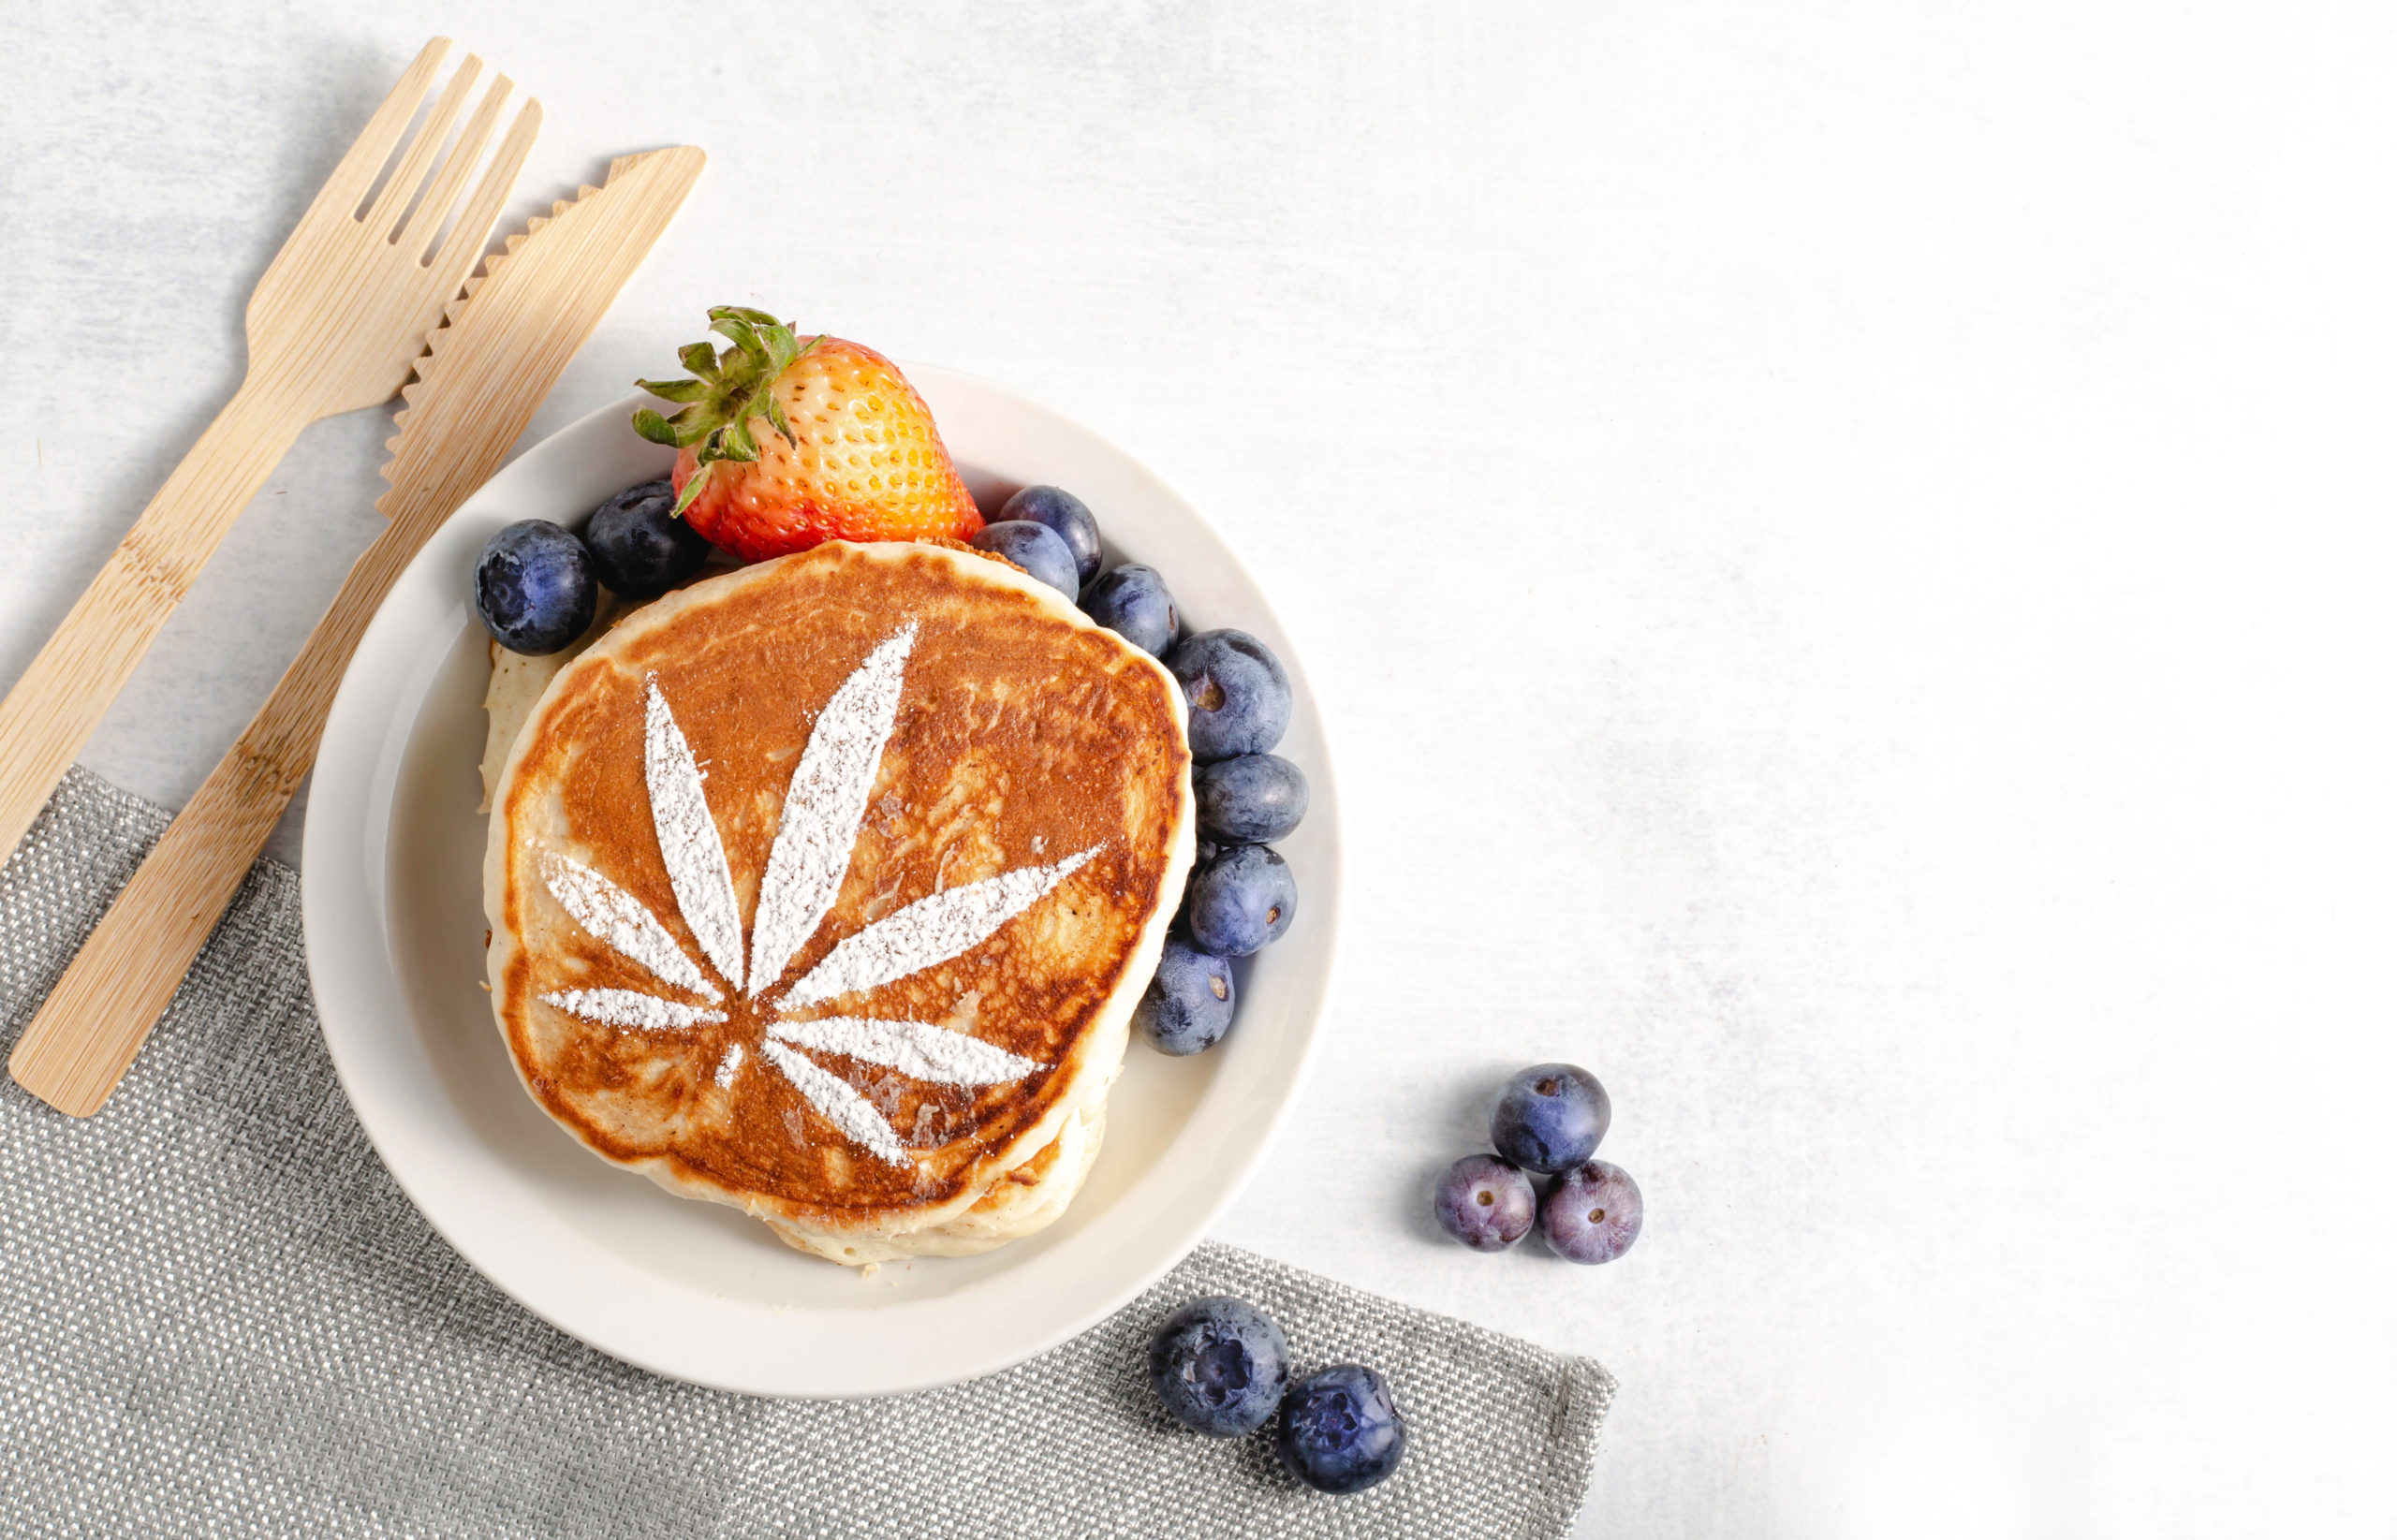 Cannabis,Powder,Over,Warm,Pancakes,With,Fresh,Blueberries,And,Strawberries